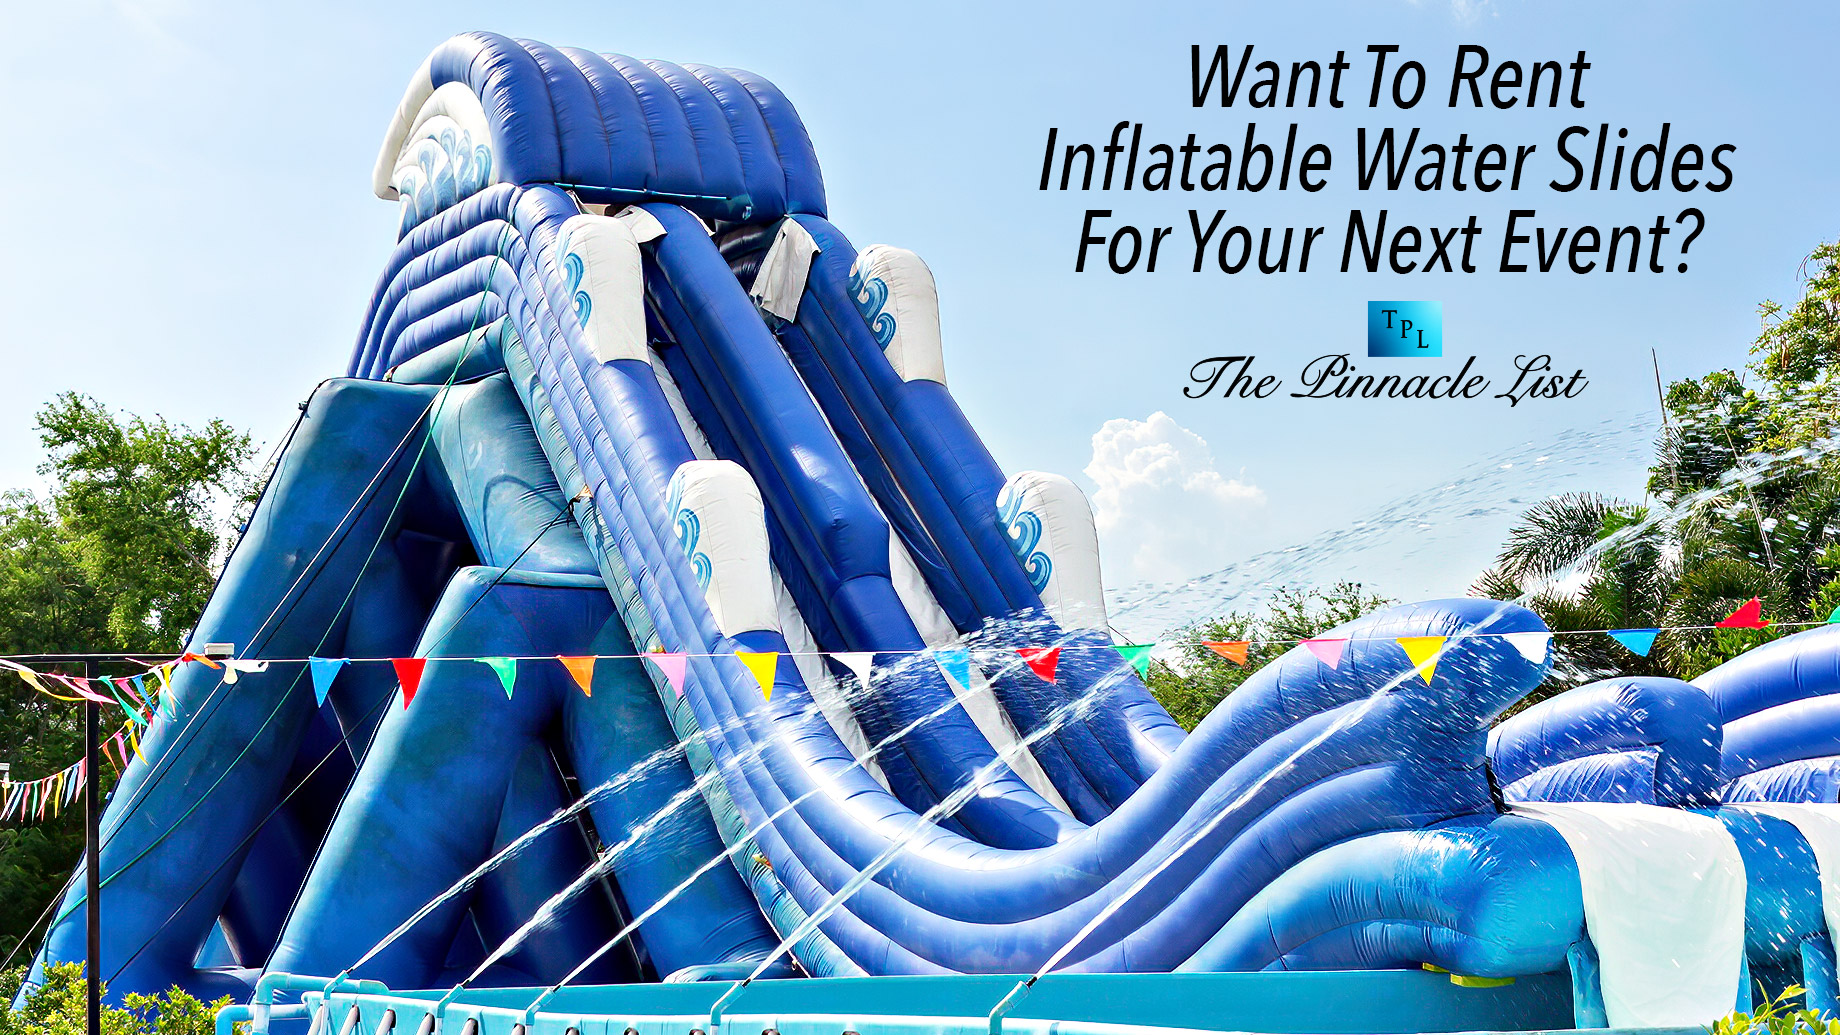 Want To Rent Inflatable Water Slides For Your Next Event?